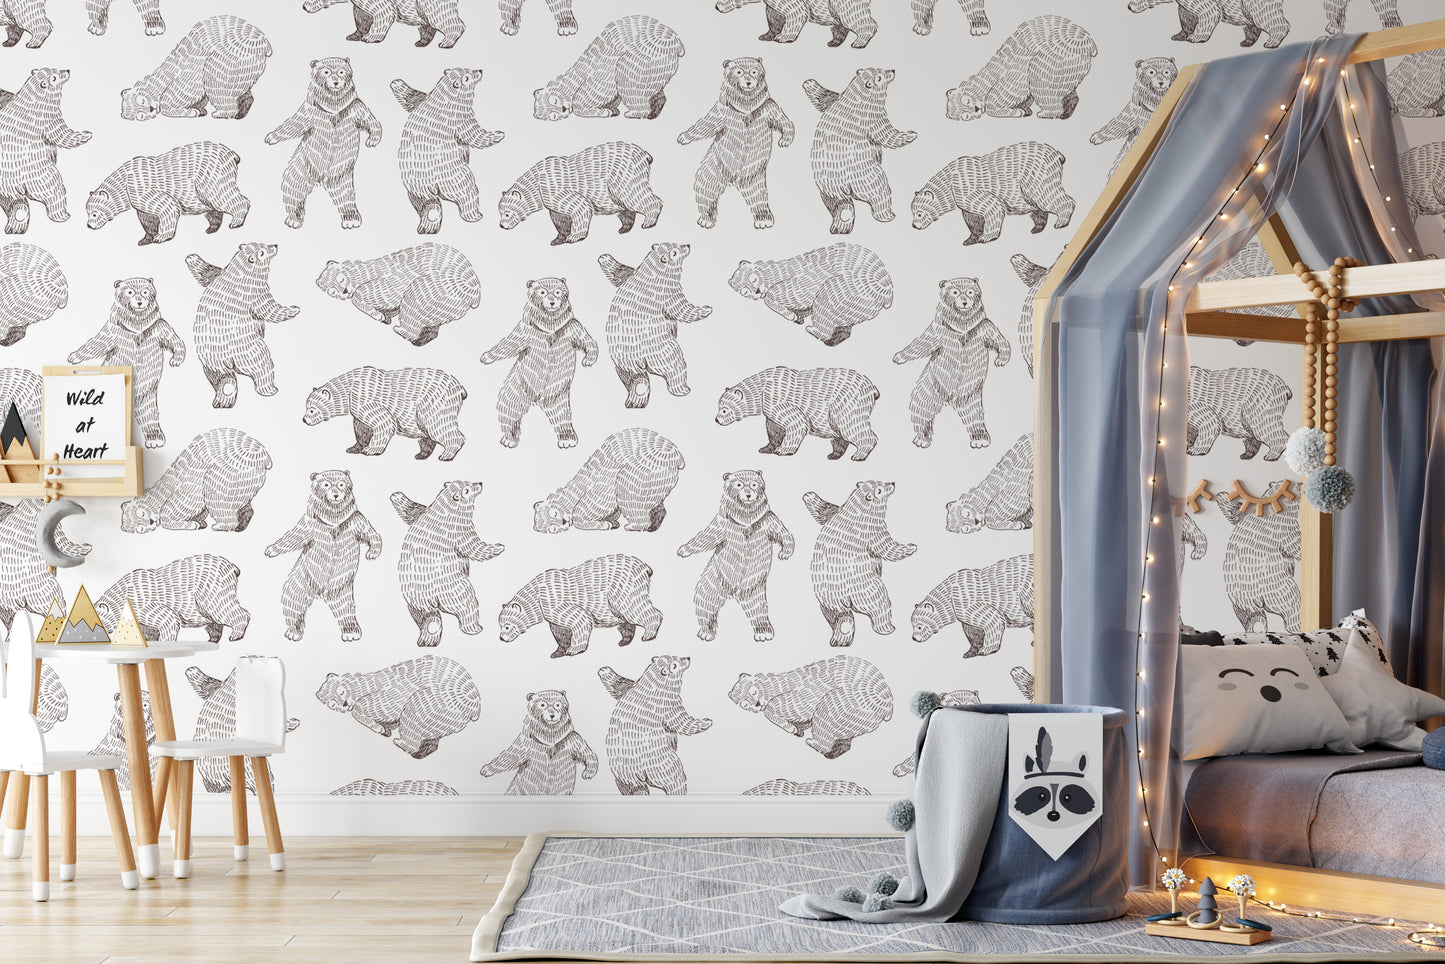 Bear Wallpaper removable peel and stick wallpaper